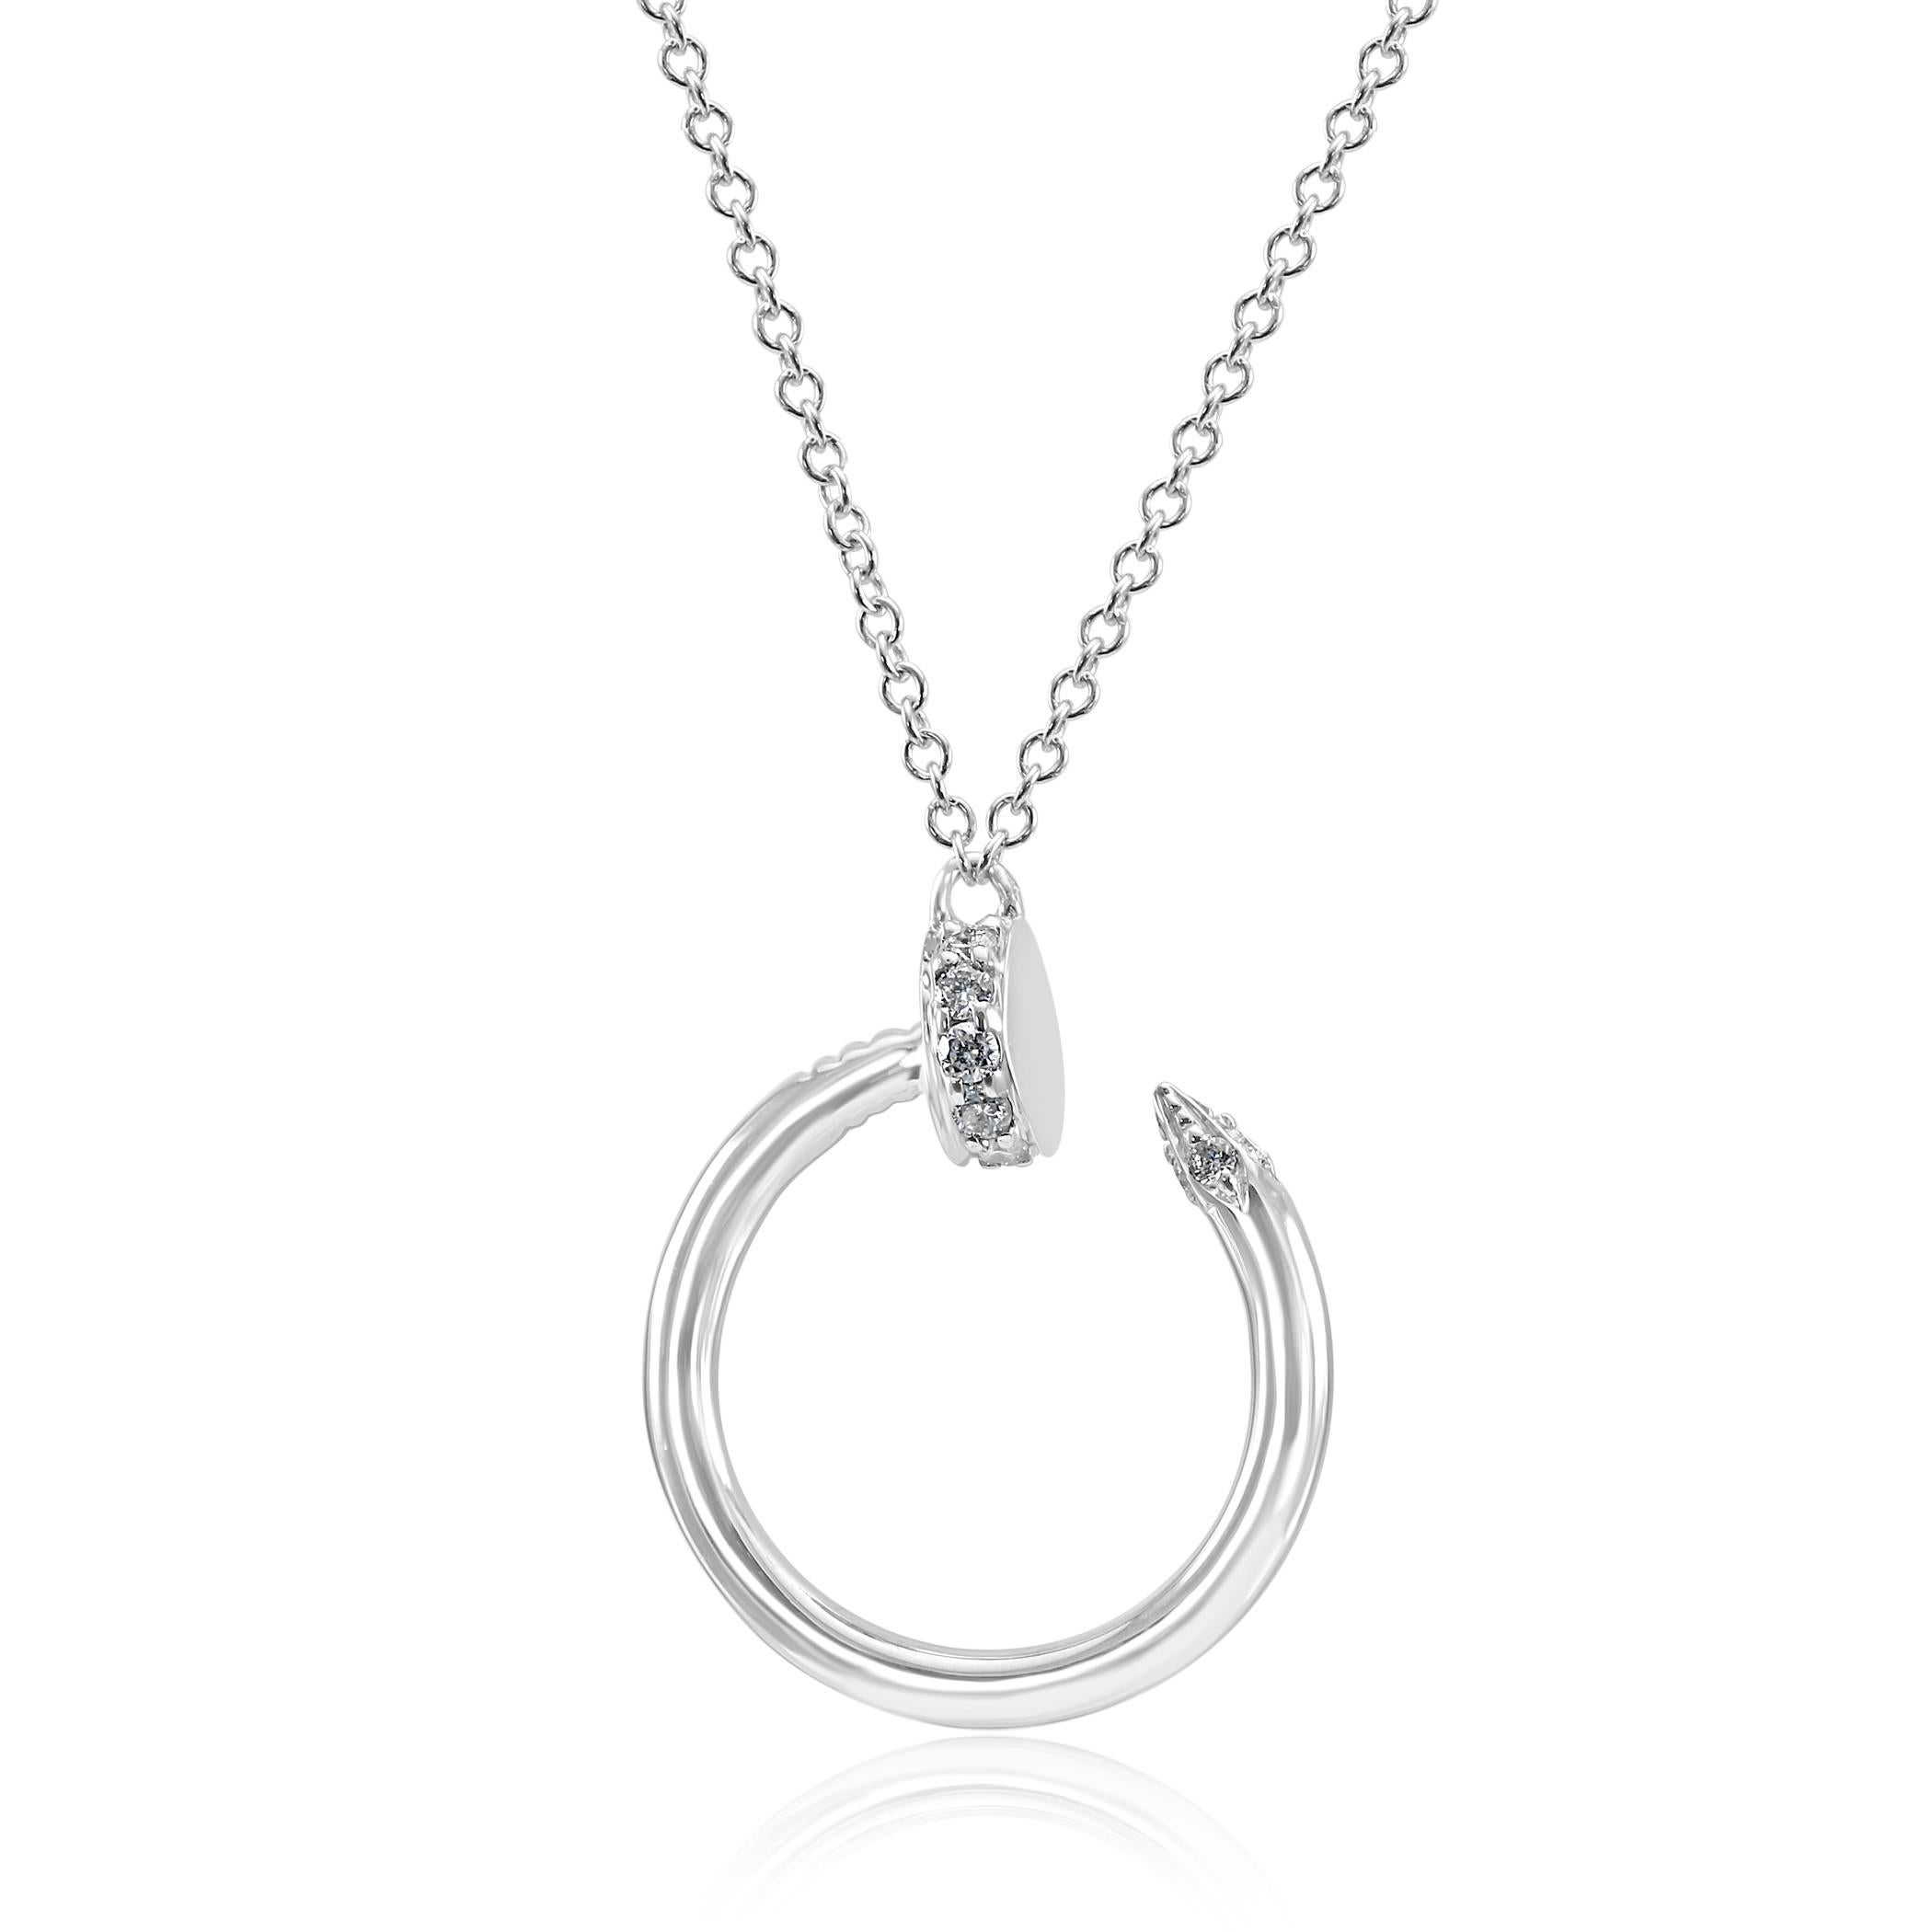 14 White Colorless SI Clarity Diamond Rounds 0.16 Carat Set in Stylish everyday wear 14K White Gold Diamond Nail style Dangle Drop Pendant Chain Necklace. Can be worn as 18 inches or 16 inches. 

Total Diamond Weight 0.16 Carat

Style available in